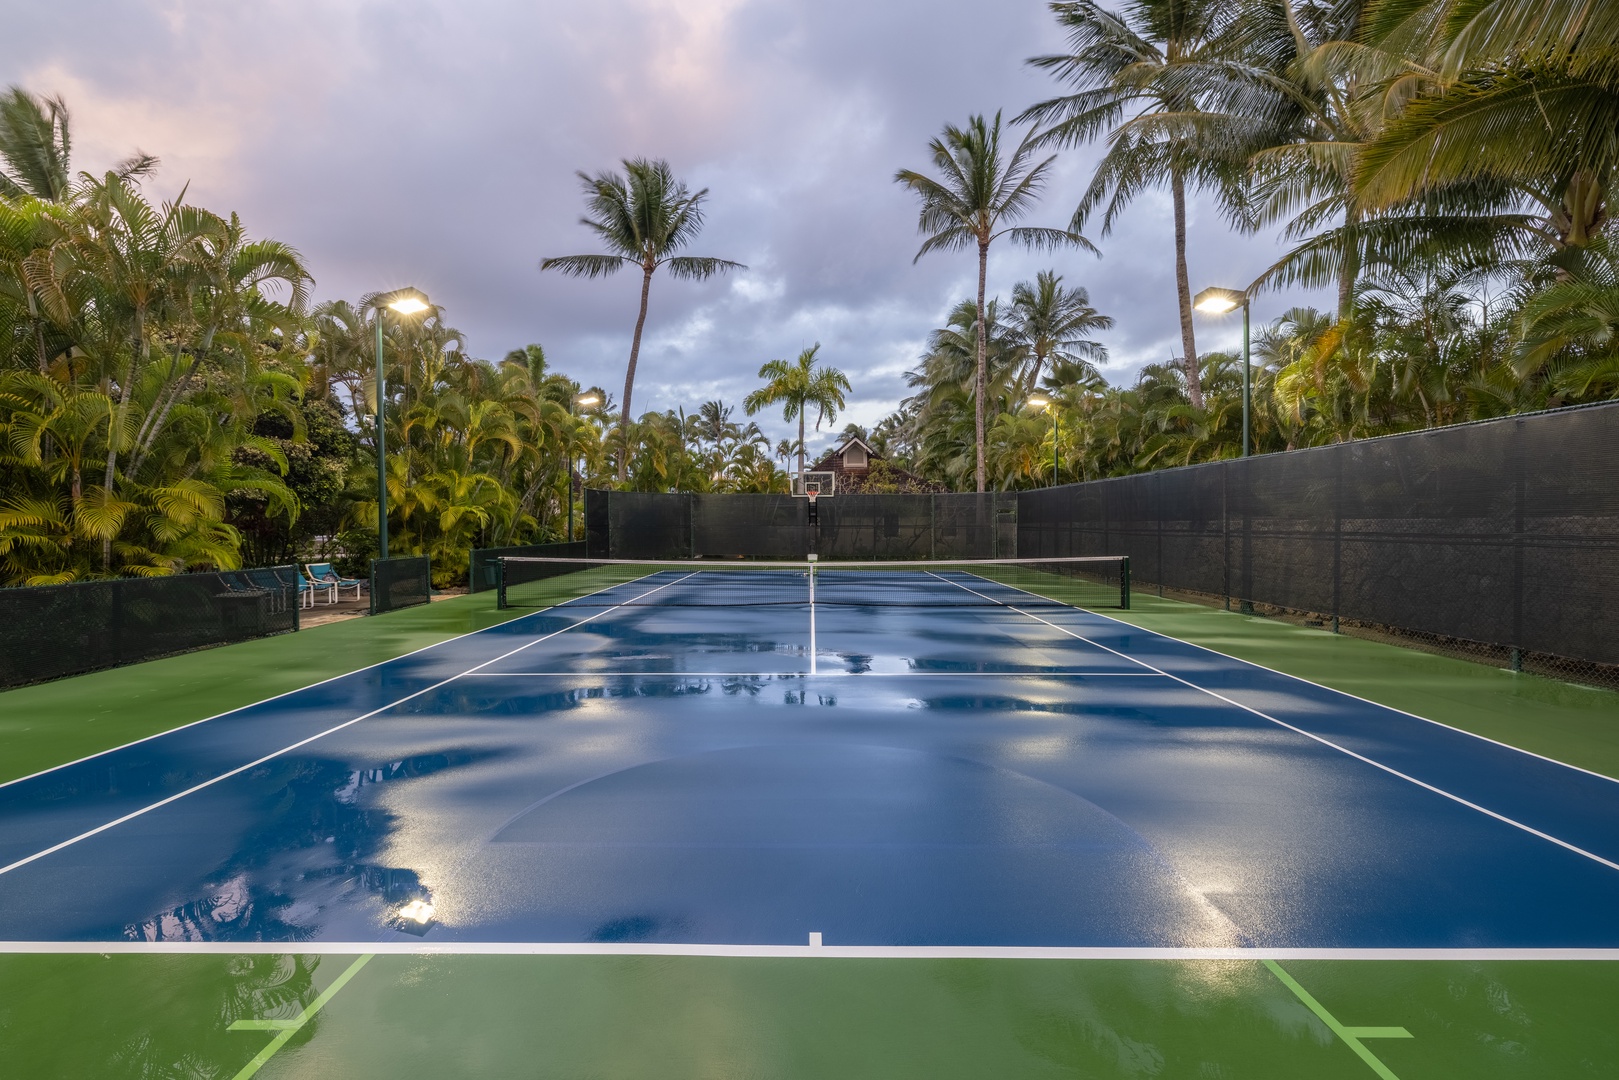 Kailua Vacation Rentals, Kailua Shores Estate 8 Bedroom - Huge tennis court just for you